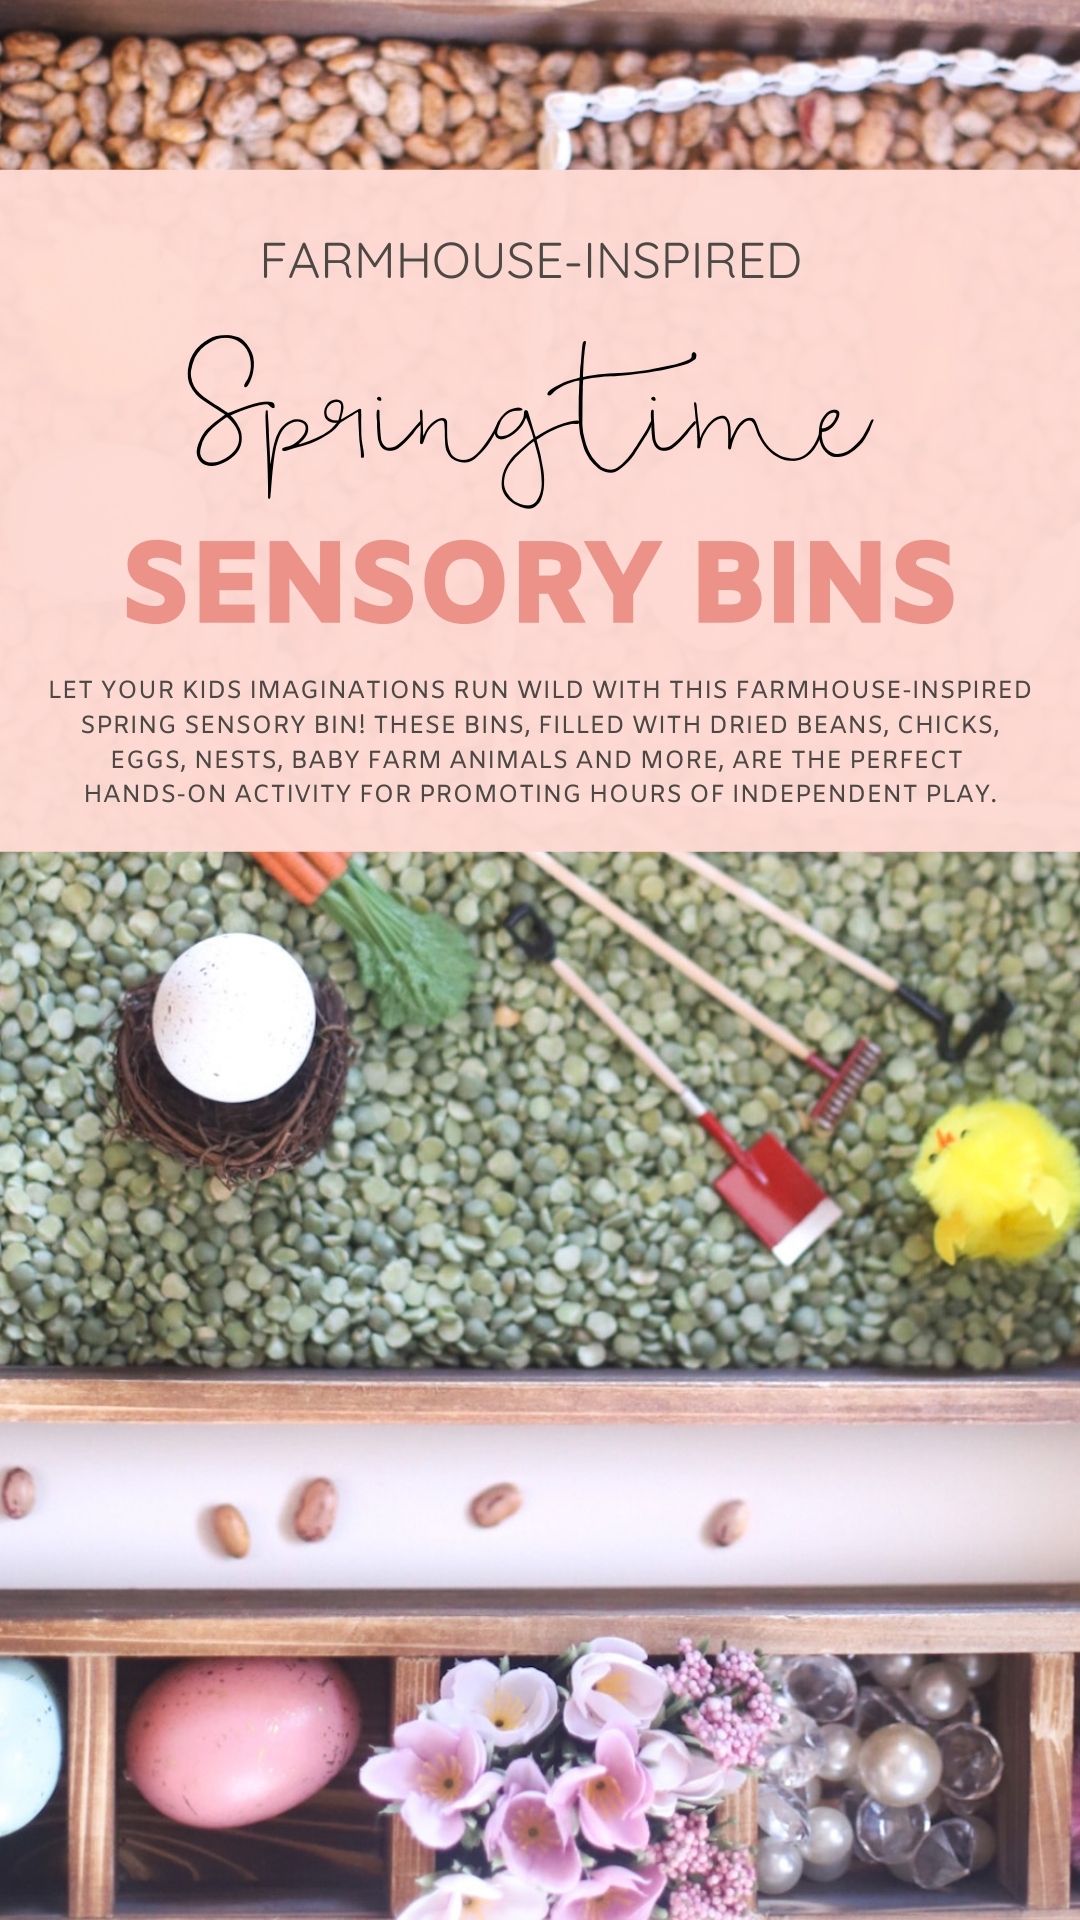 Farmhouse-Inspired Spring Sensory Bins for Kids - The Perfect Hands-On Activity for Toddlers and Beyond | @glitterinclexi | GLITTERINC.COM